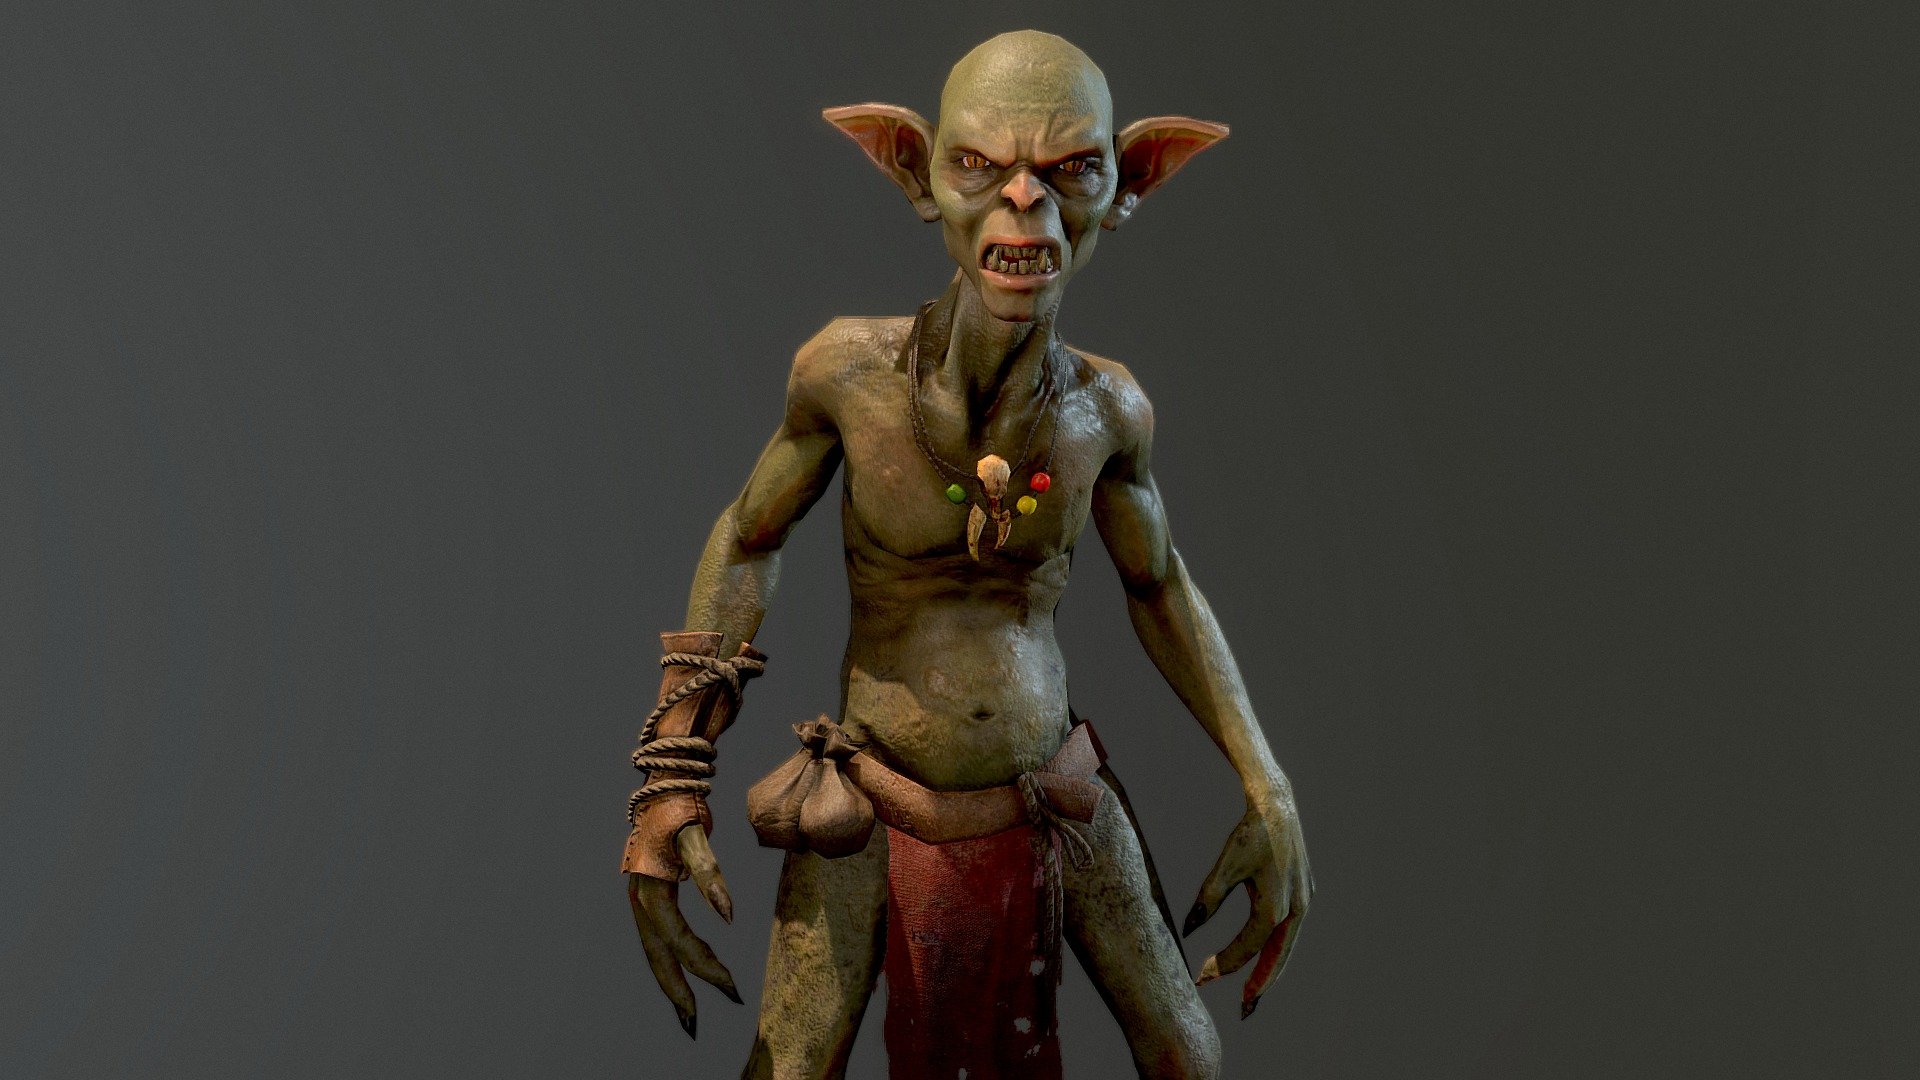 New and Improved Goblin for Skyblivion project.

This version of the goblin is regular and have no tribal marks.

Tools used: Zbrush, Substance painter, Blender, Affinity photo - Goblin - Skyblivion - 3D model by Weekend 3d model